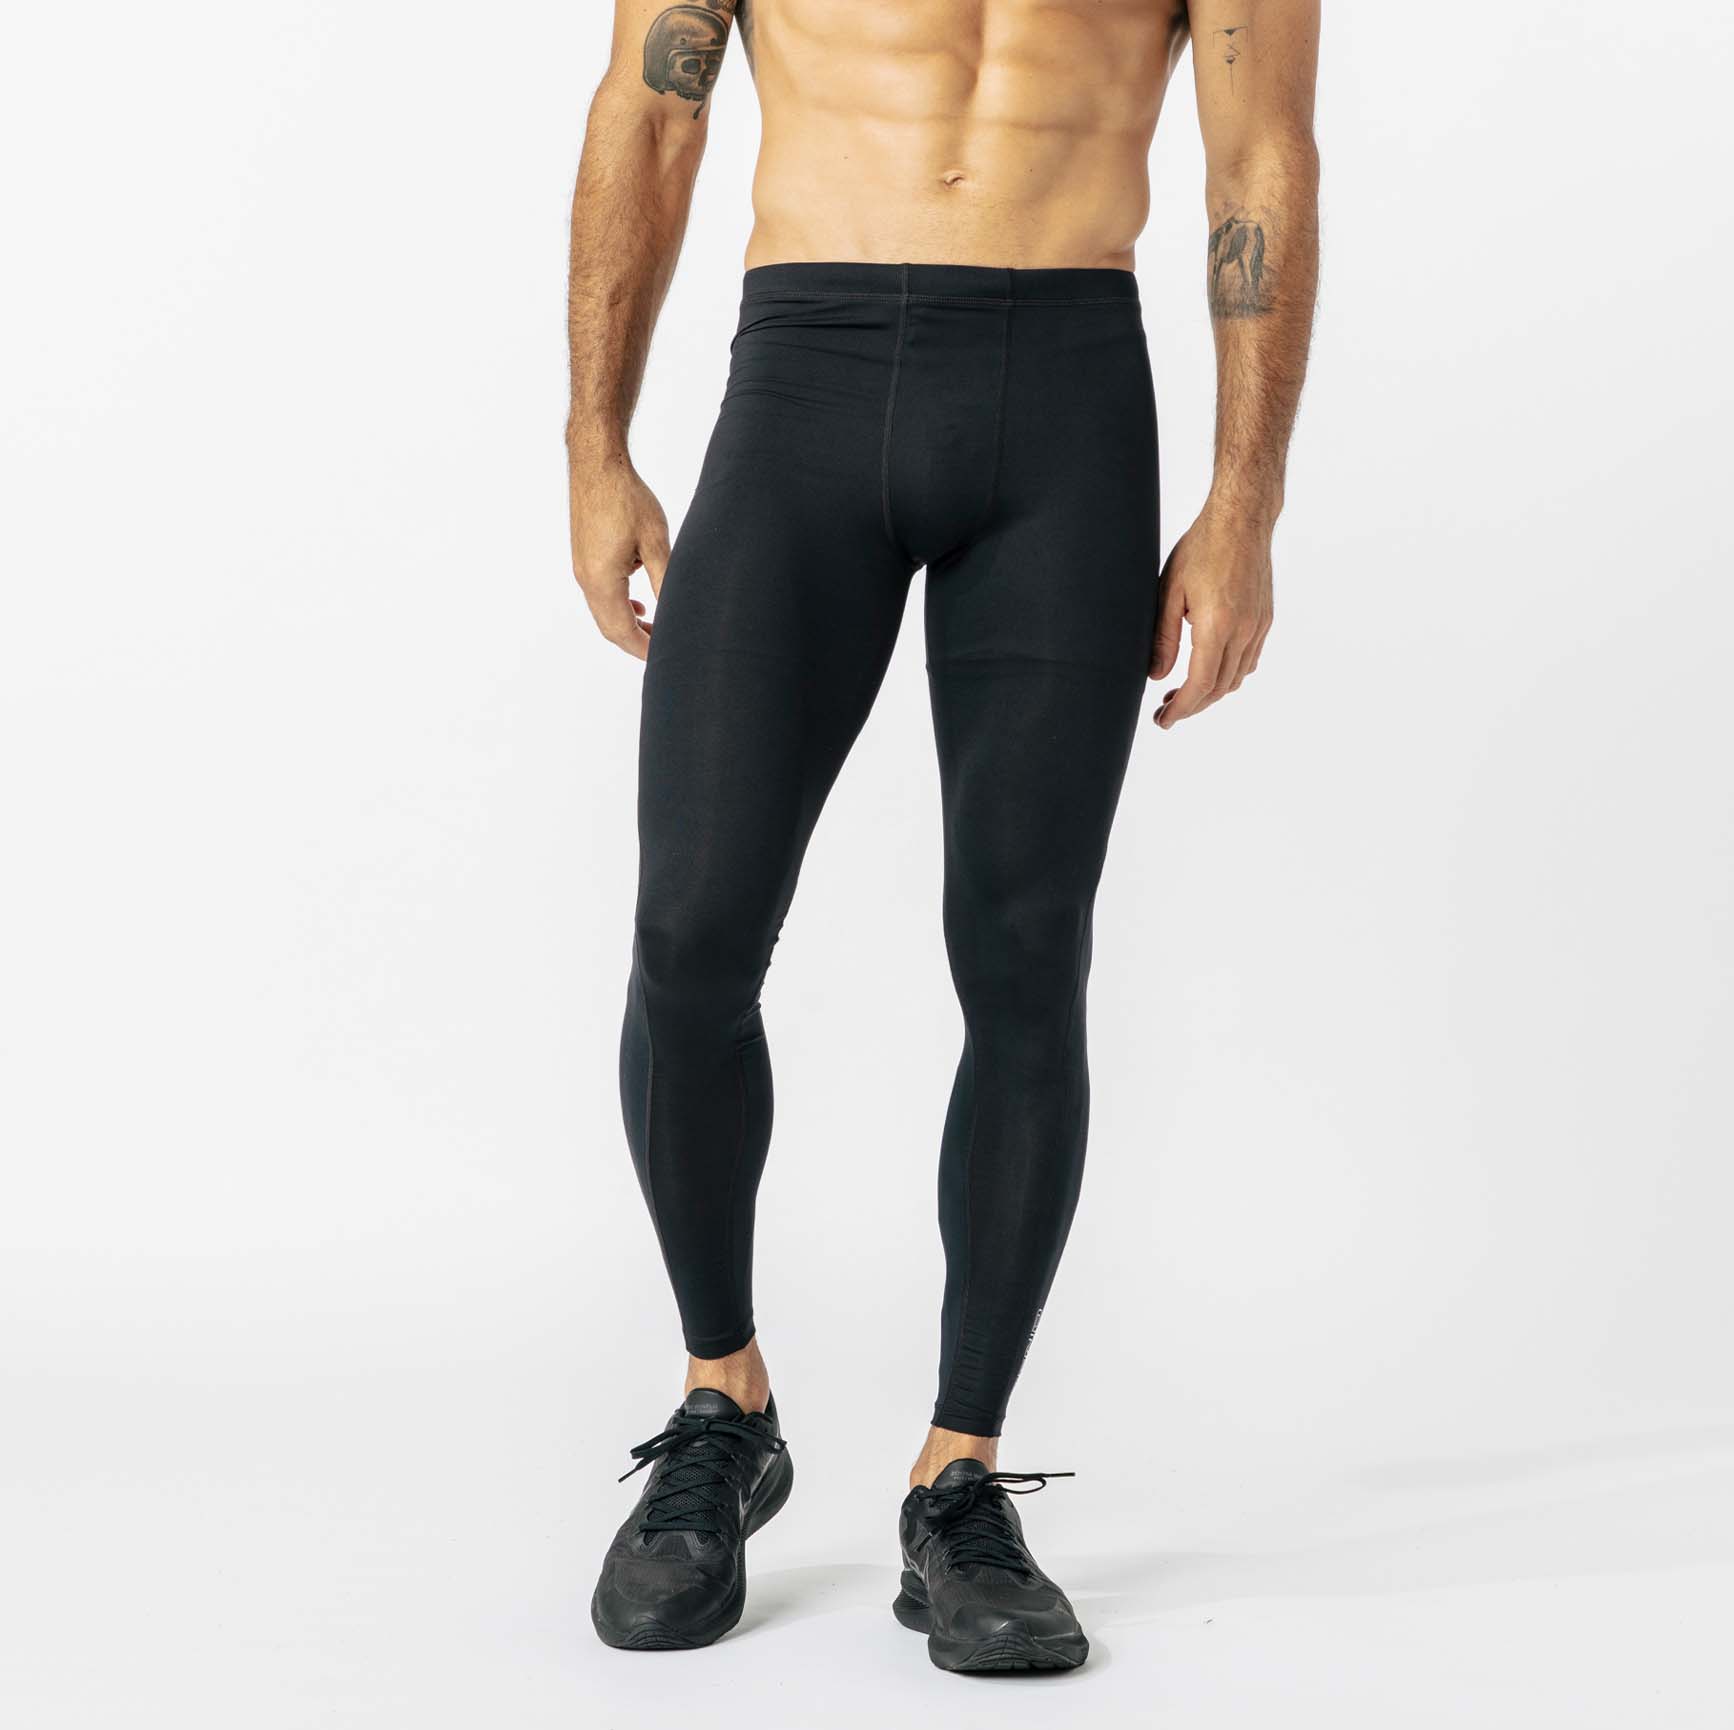  Fldy Men's Thermal Compression Pants Leggings Sexy